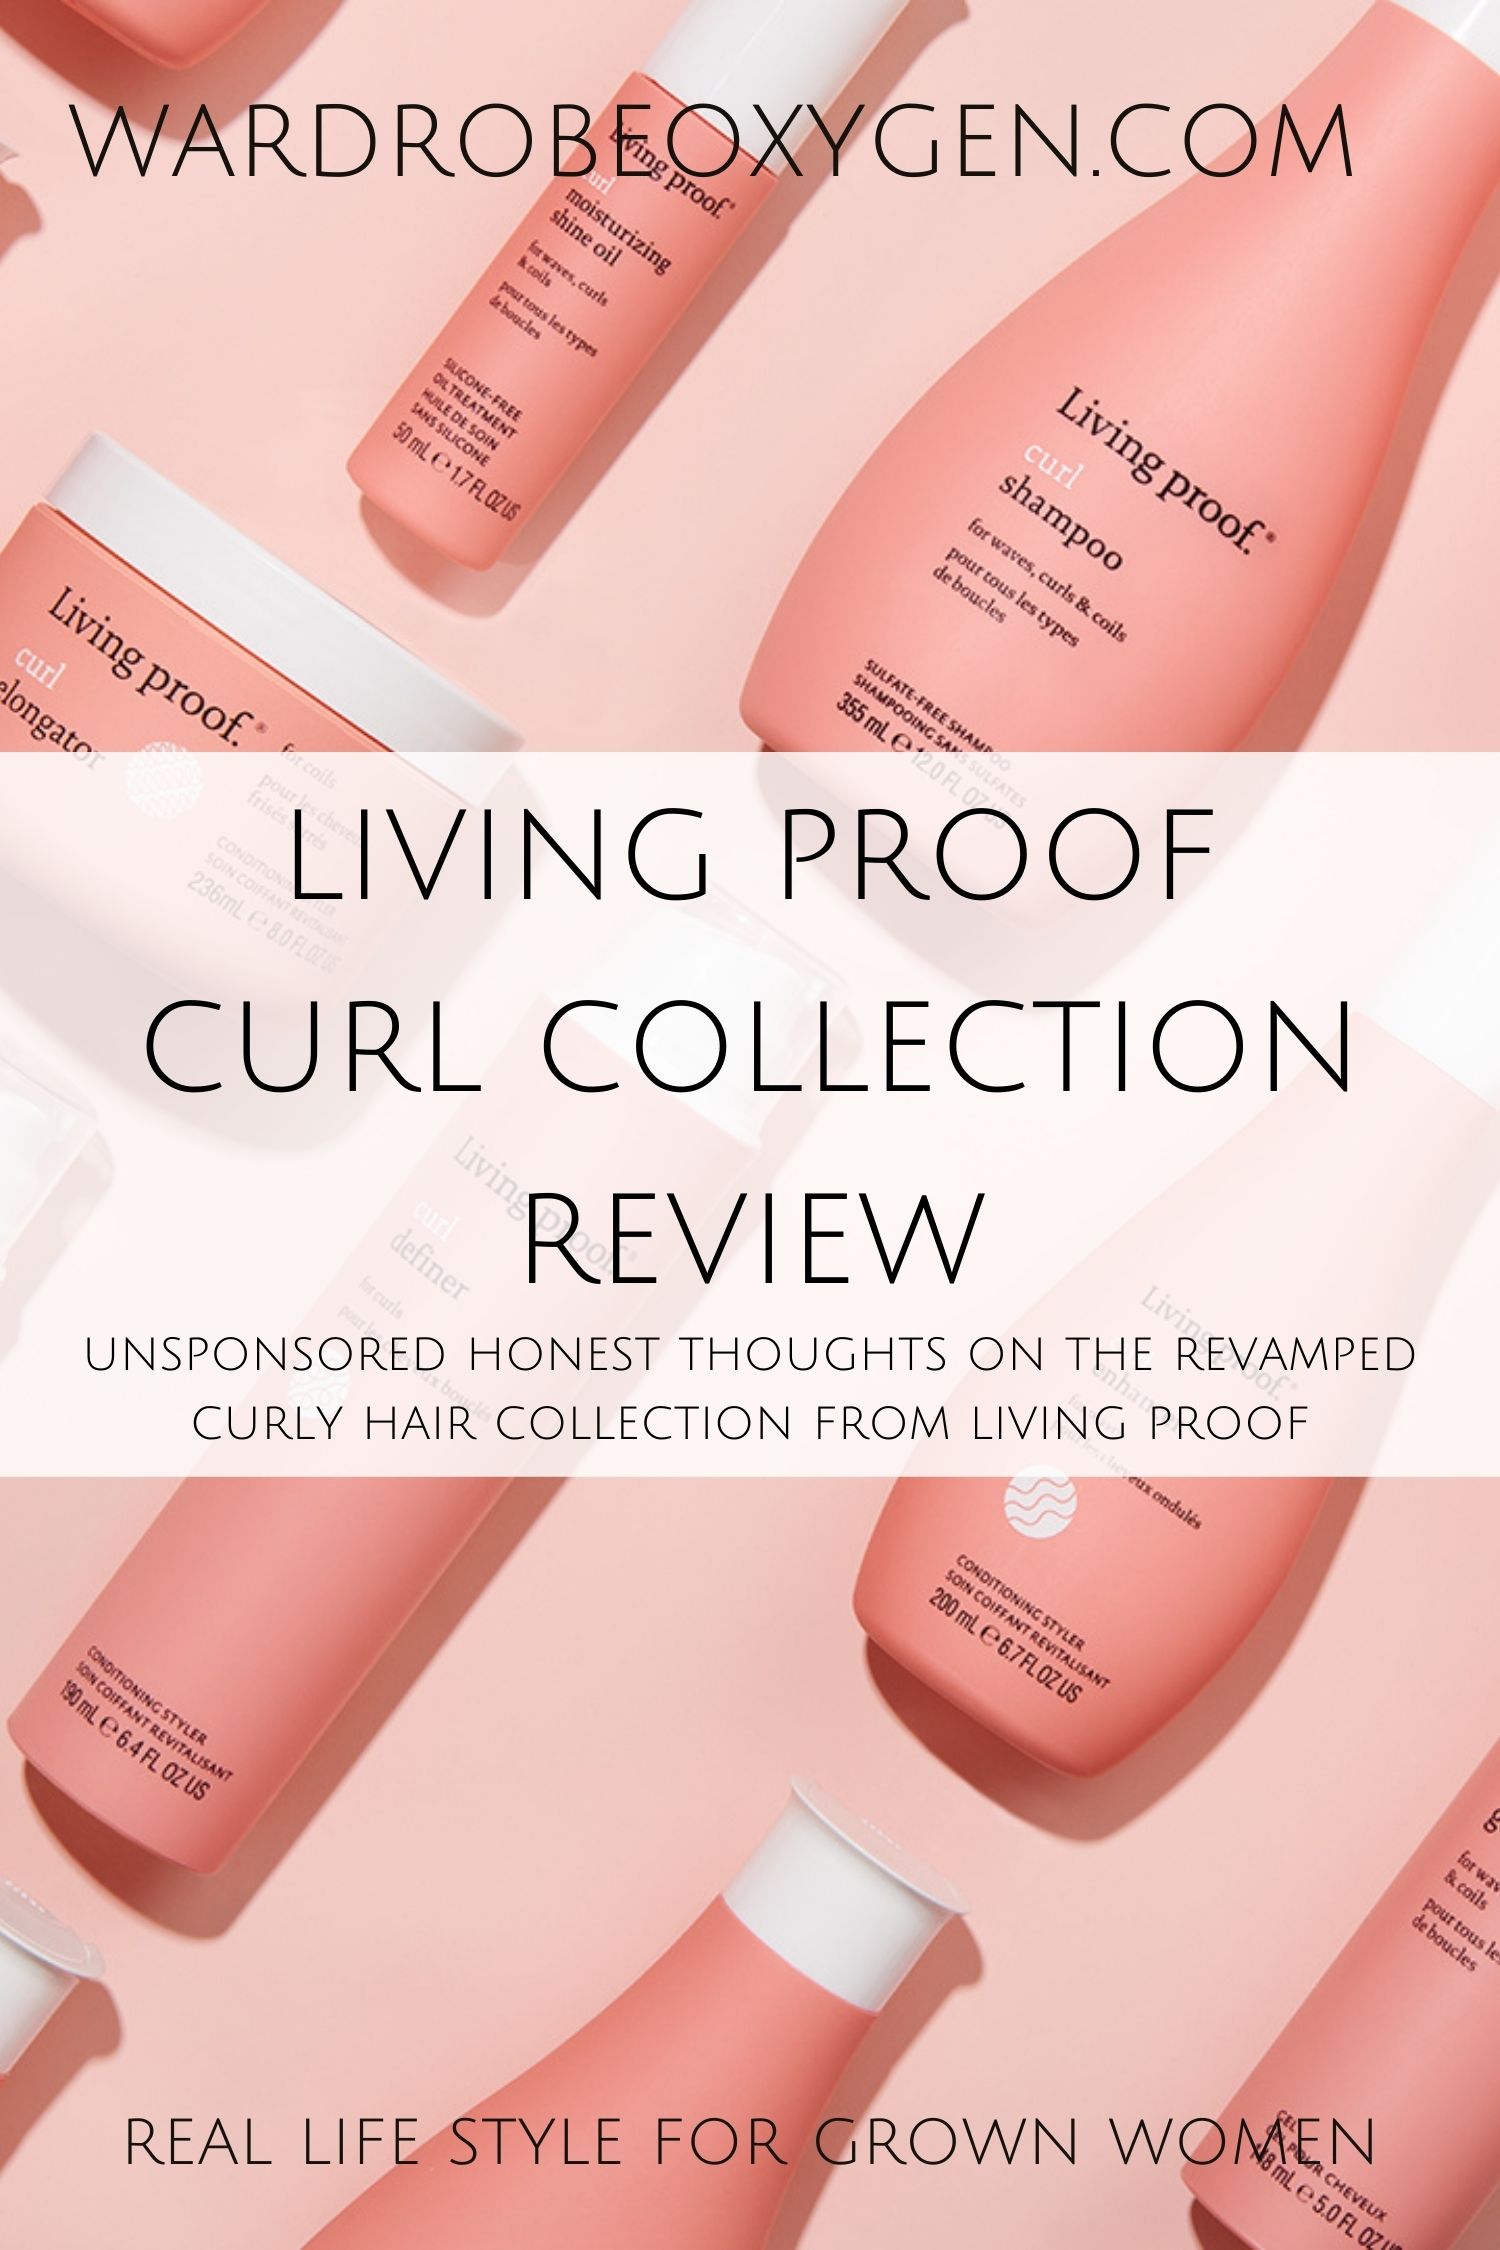 Living Proof Curl Collection Review - Wardrobe Oxygen